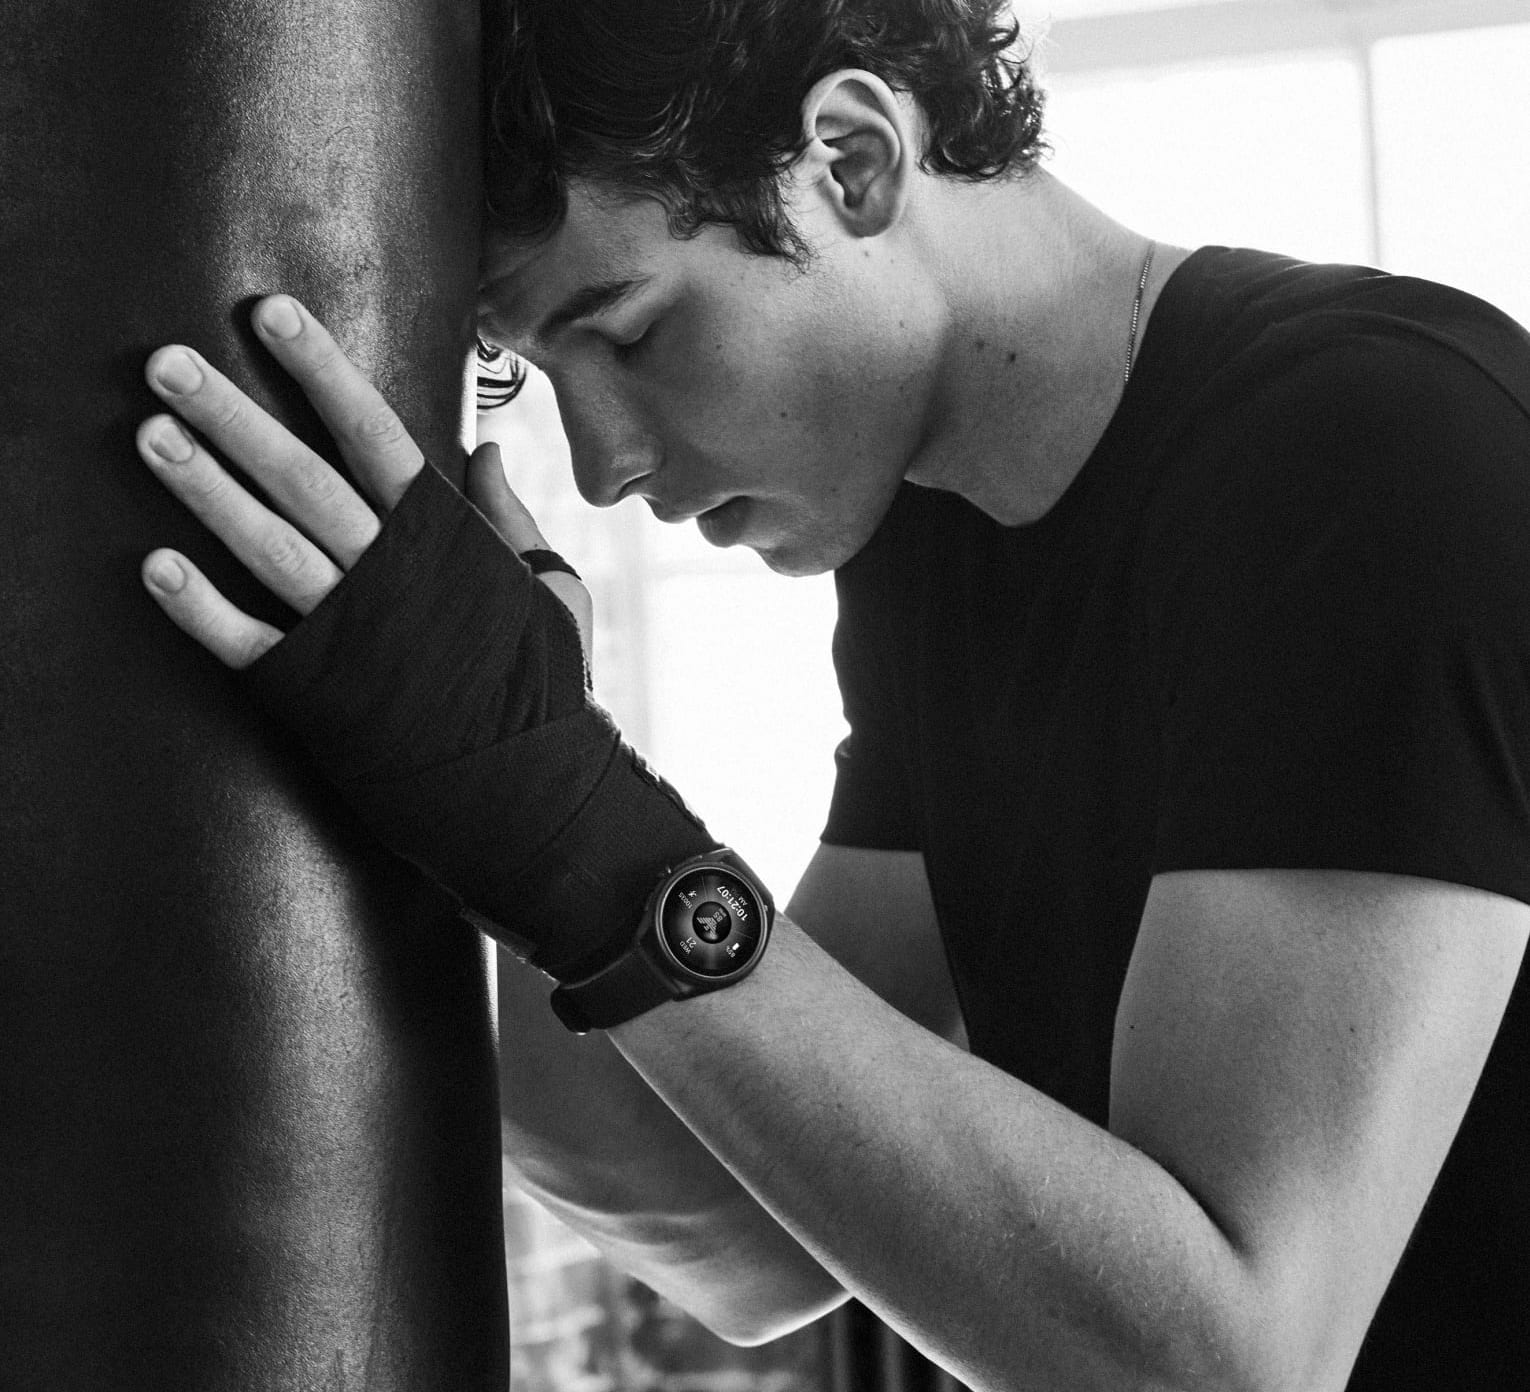 Emporio armani and shawn mendes extend their collaboration into the spring summer 2019 season 2 credit billy kid e1551866651706